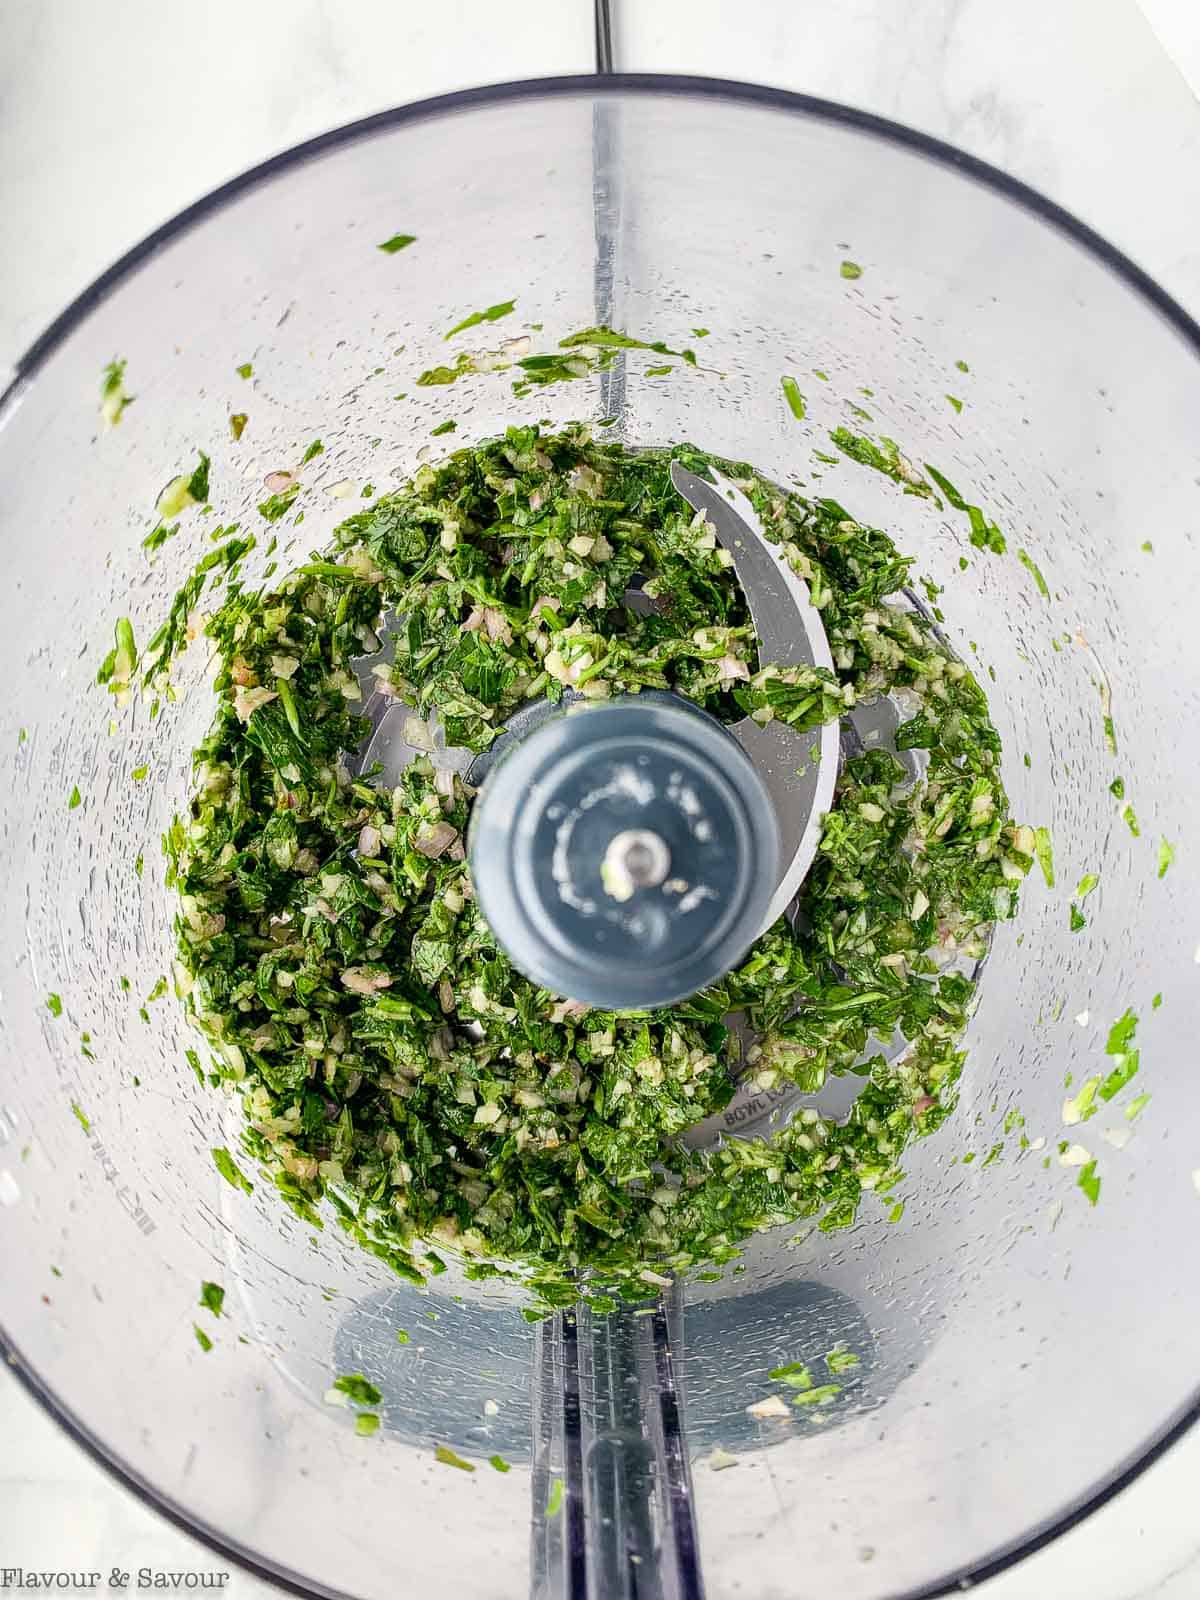 Chimichurri sauce chopped coarsely in food processor.